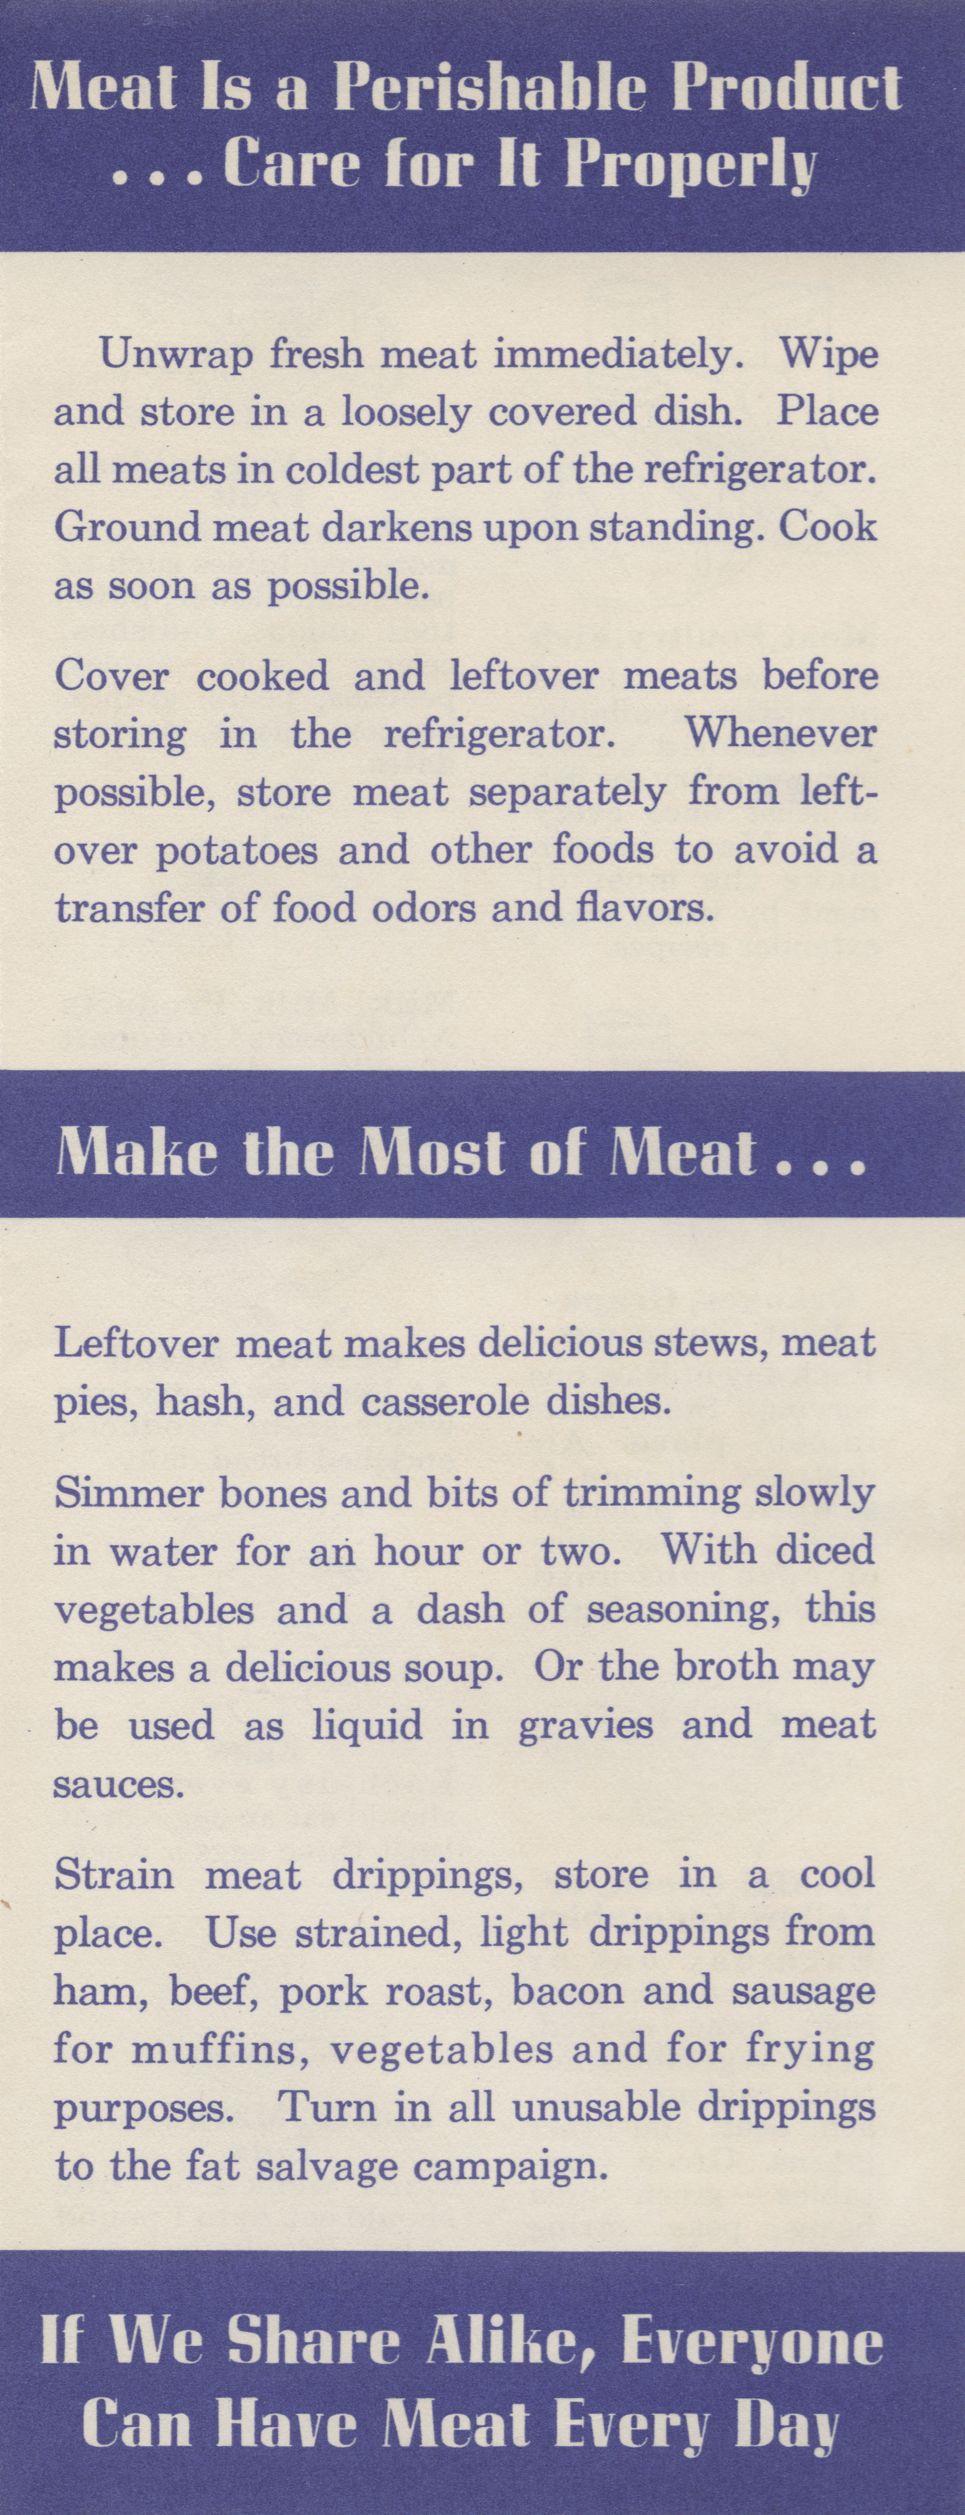 Meat Is a Perishable Product... Care for It Properly Unwrap fresh meat immediately. Wipe and store in a loosely covered dish. Place all meats in coldest part of the refrigerator.